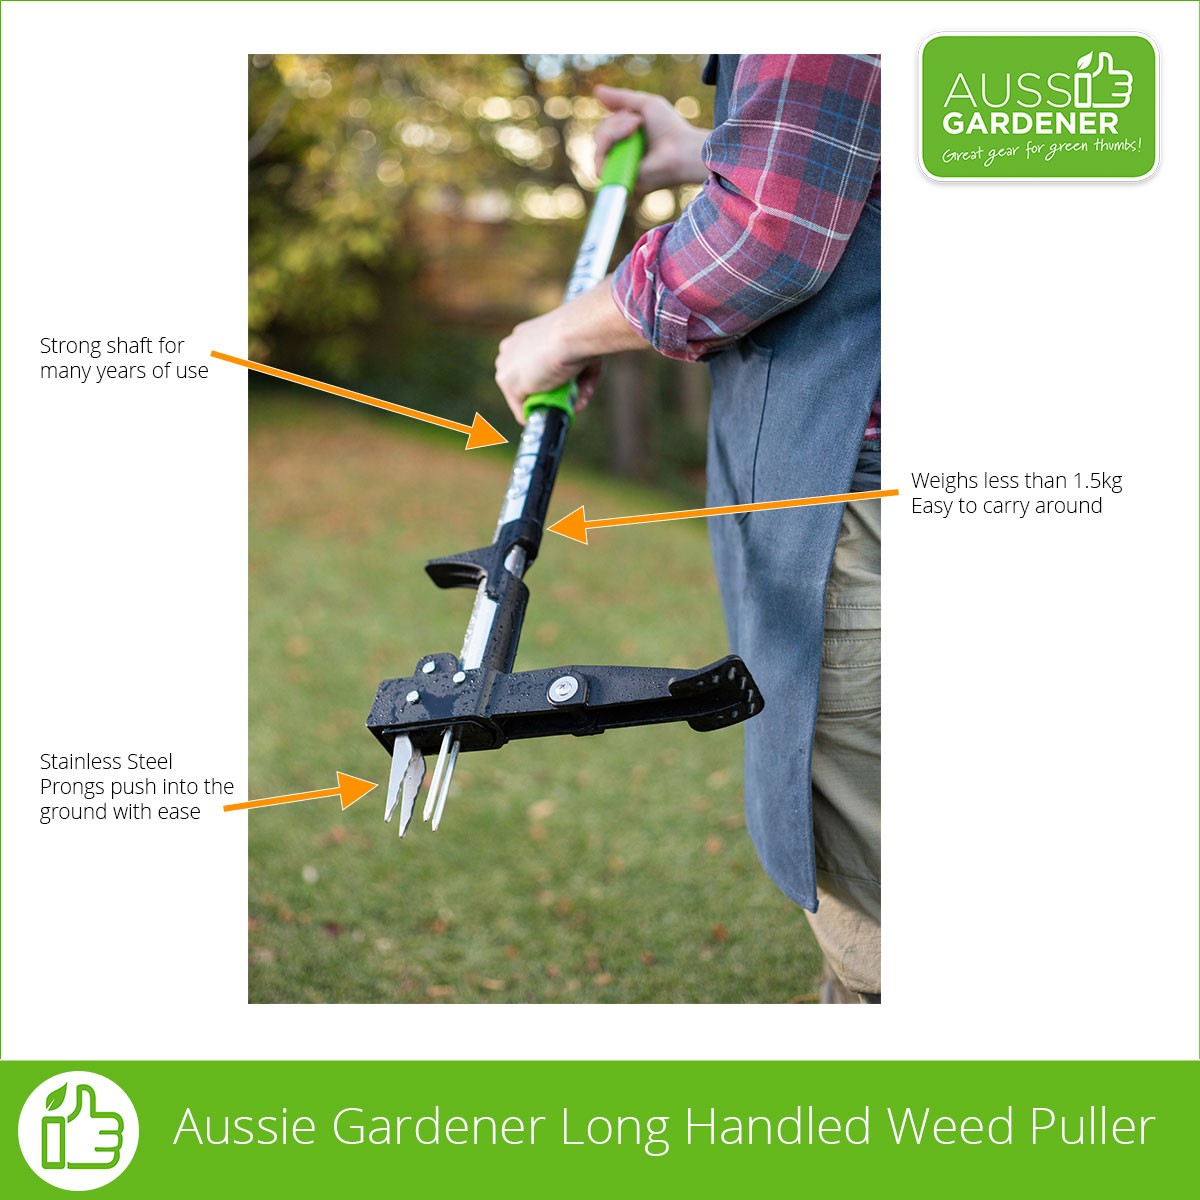 Win this Long Handled Weed Puller 1 in 100 entries wins! — Aussie Gardener